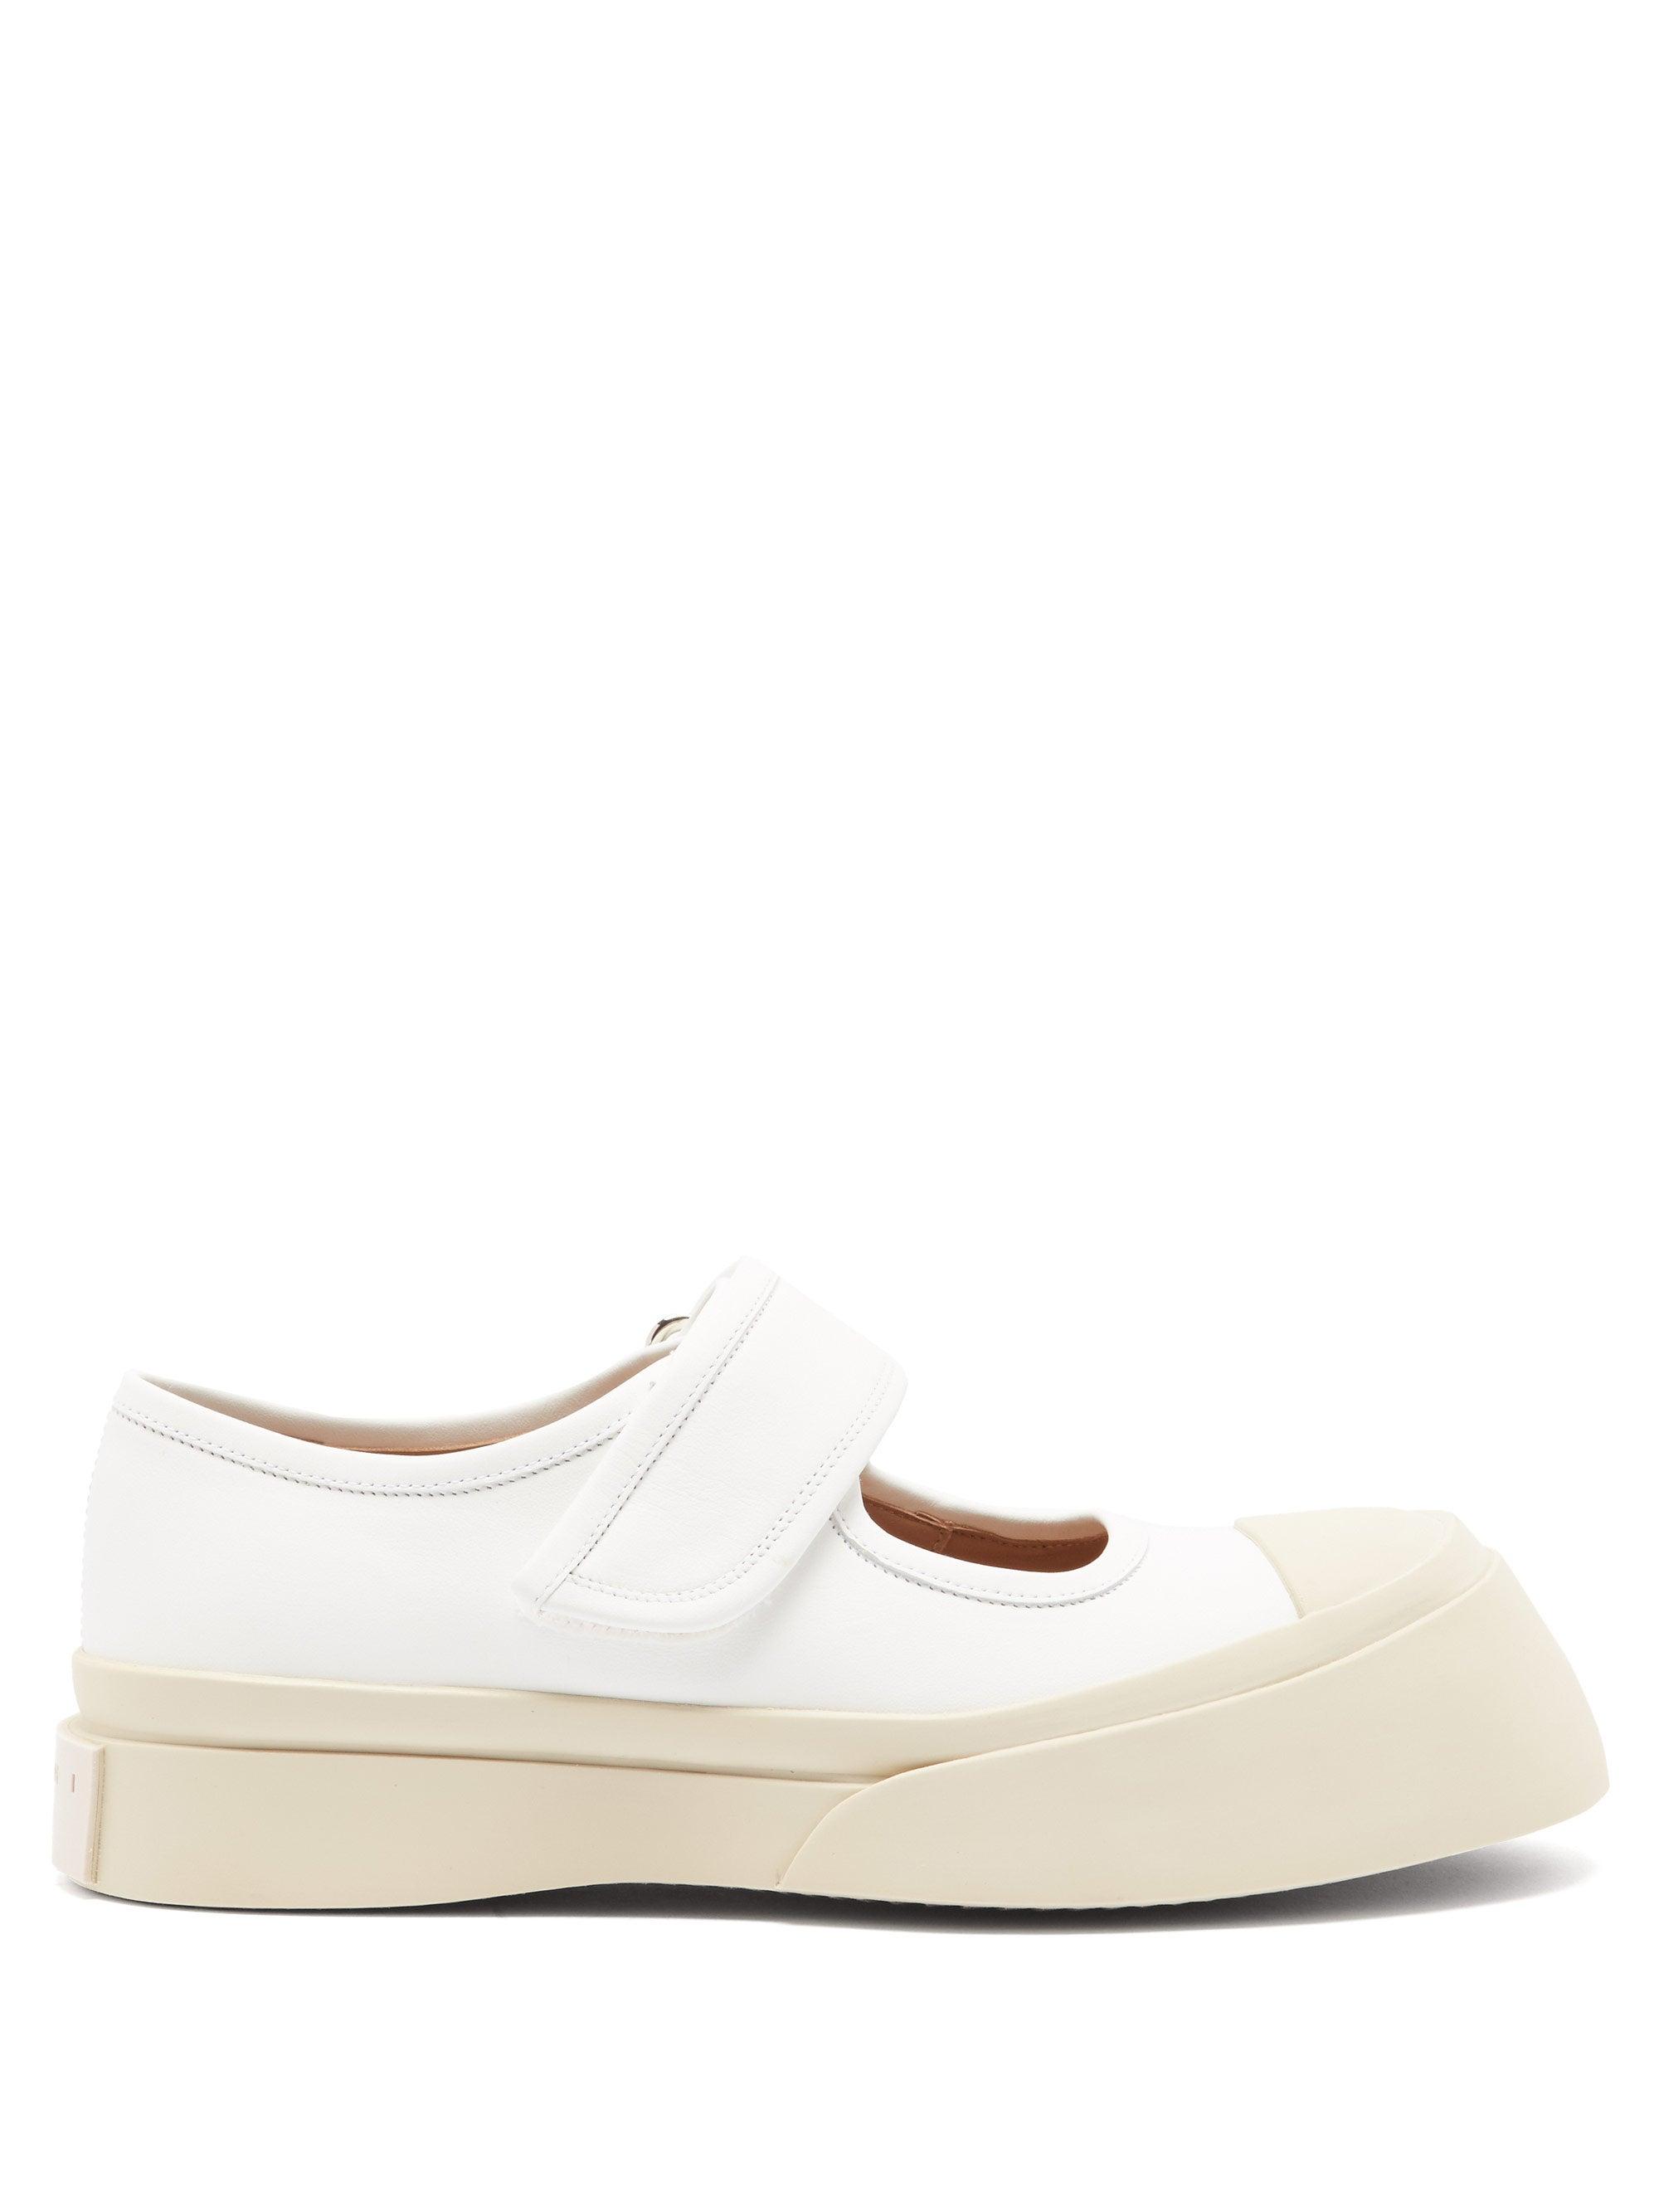 Marni Pablo Chunky-sole Leather Mary-jane Shoes in White | Lyst